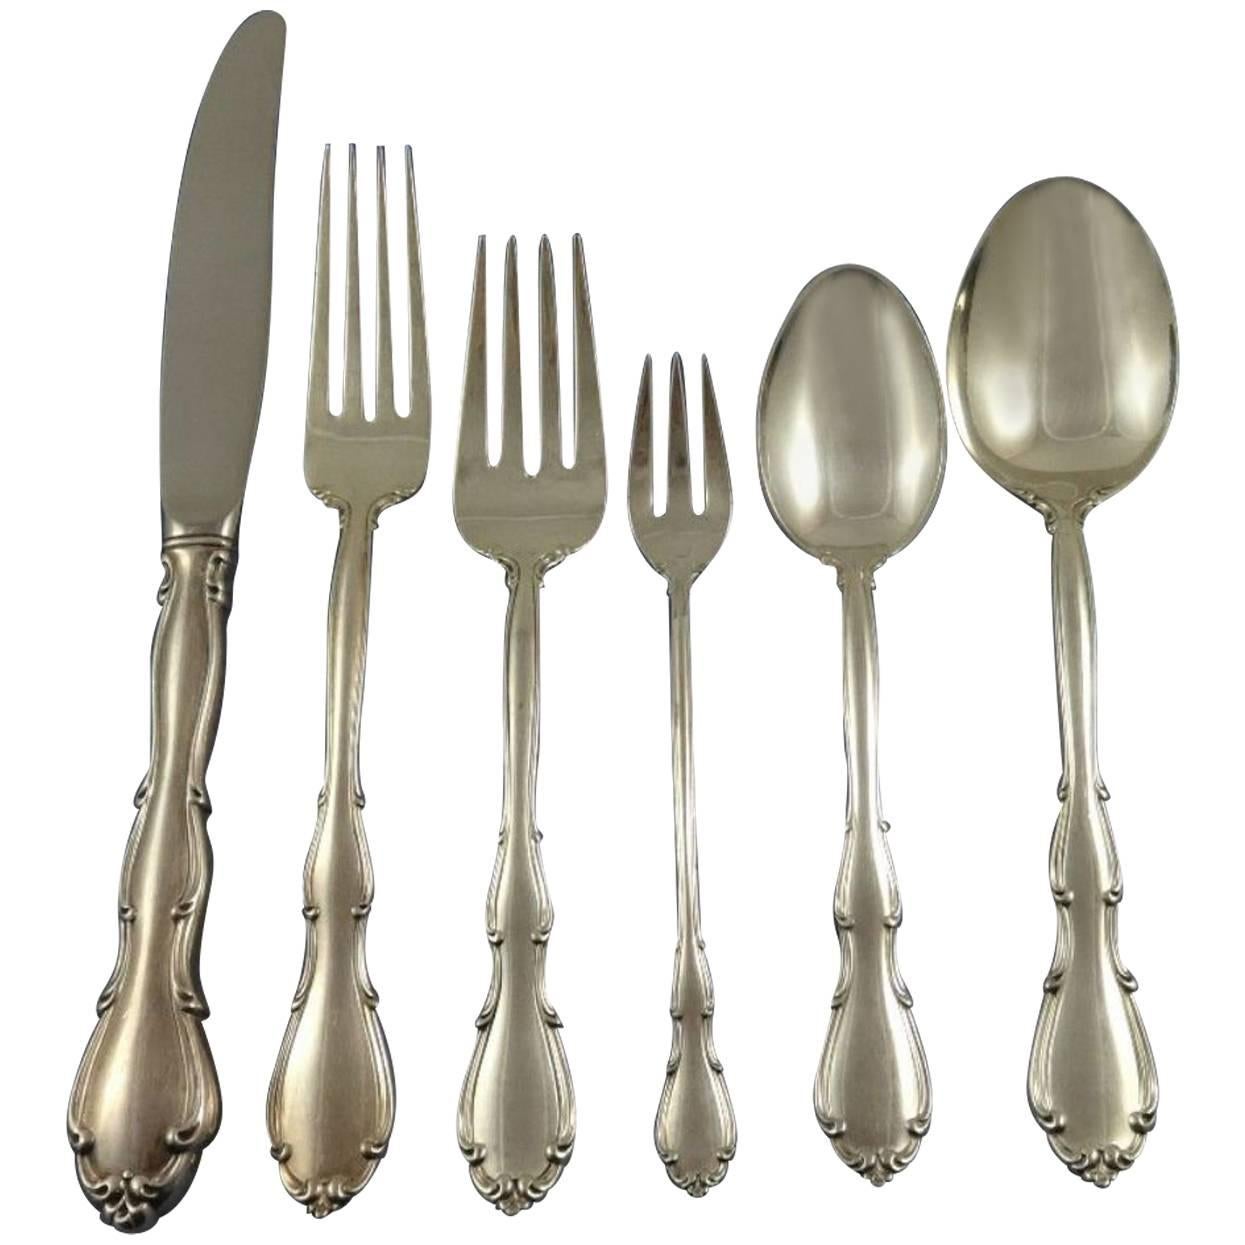 Fontana by Towle Sterling Silver Flatware Set for 12 Service of 77 Pieces